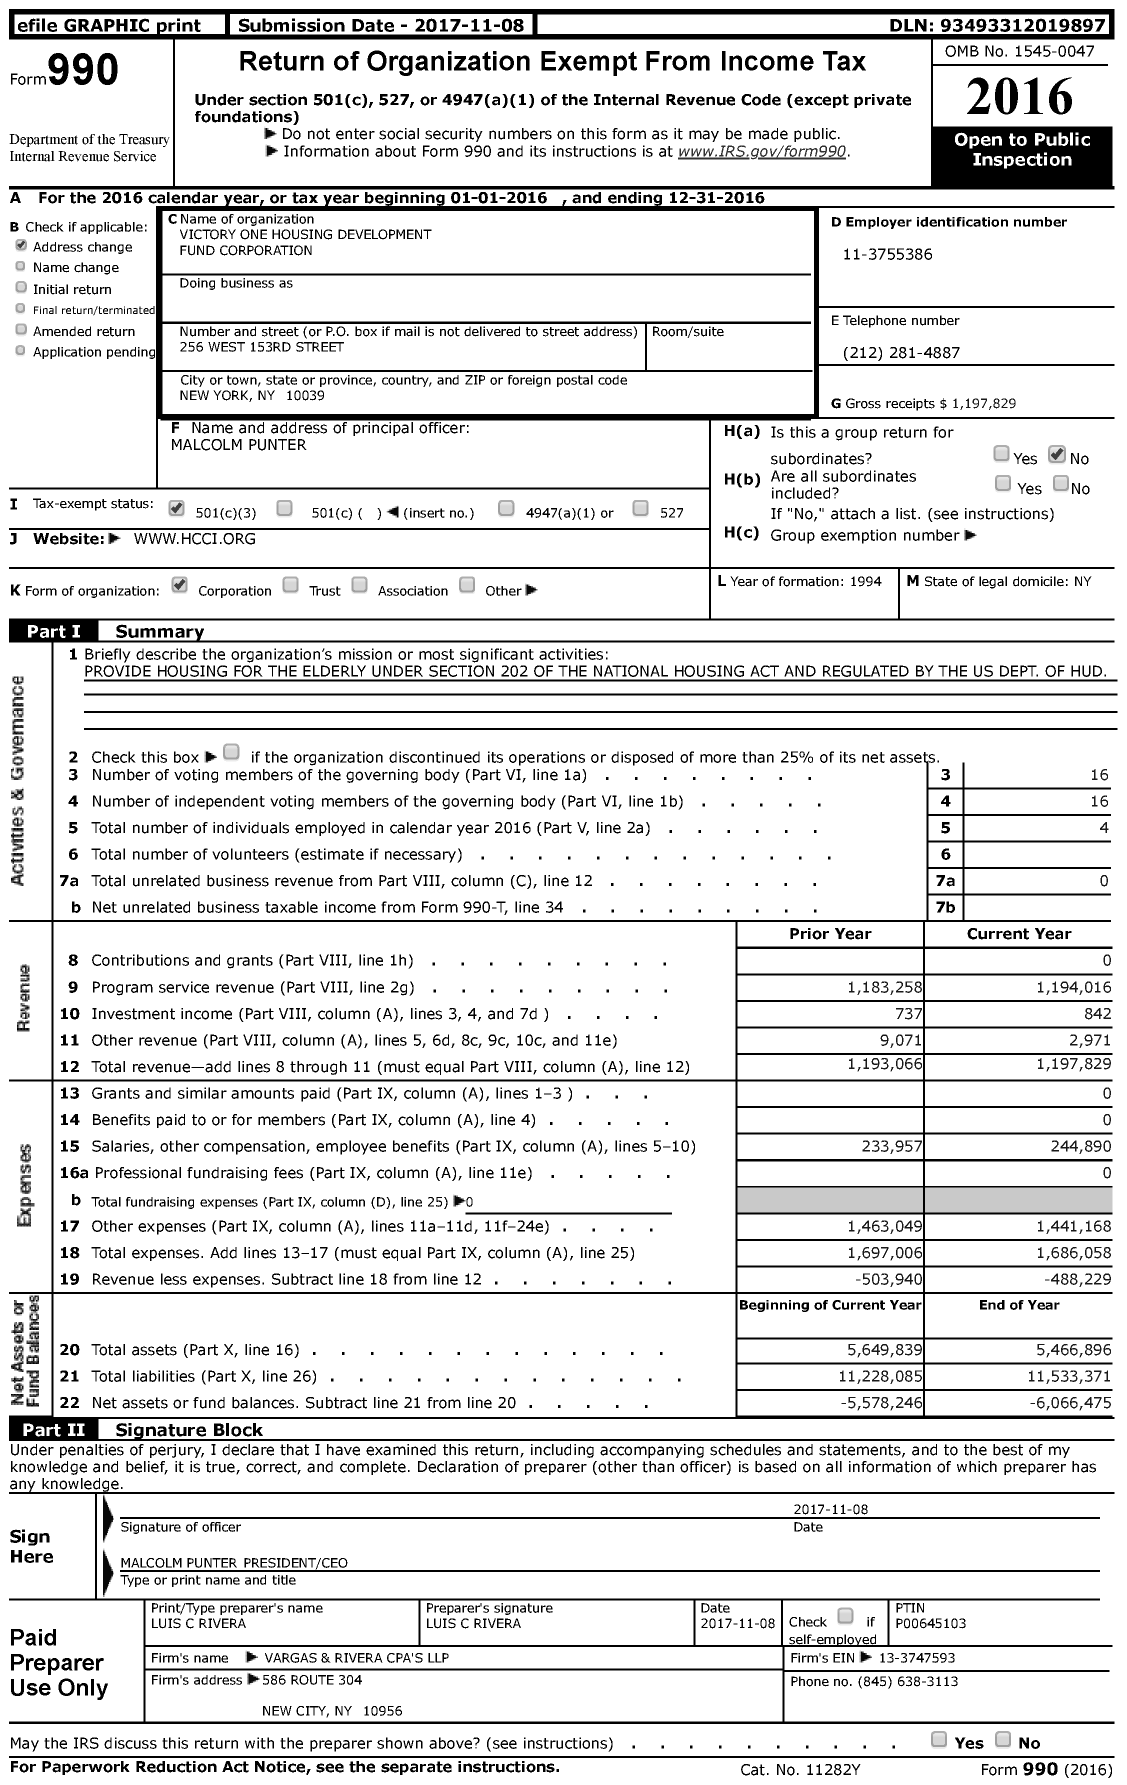 Image of first page of 2016 Form 990 for Victory One Housing Development Fund Corporation